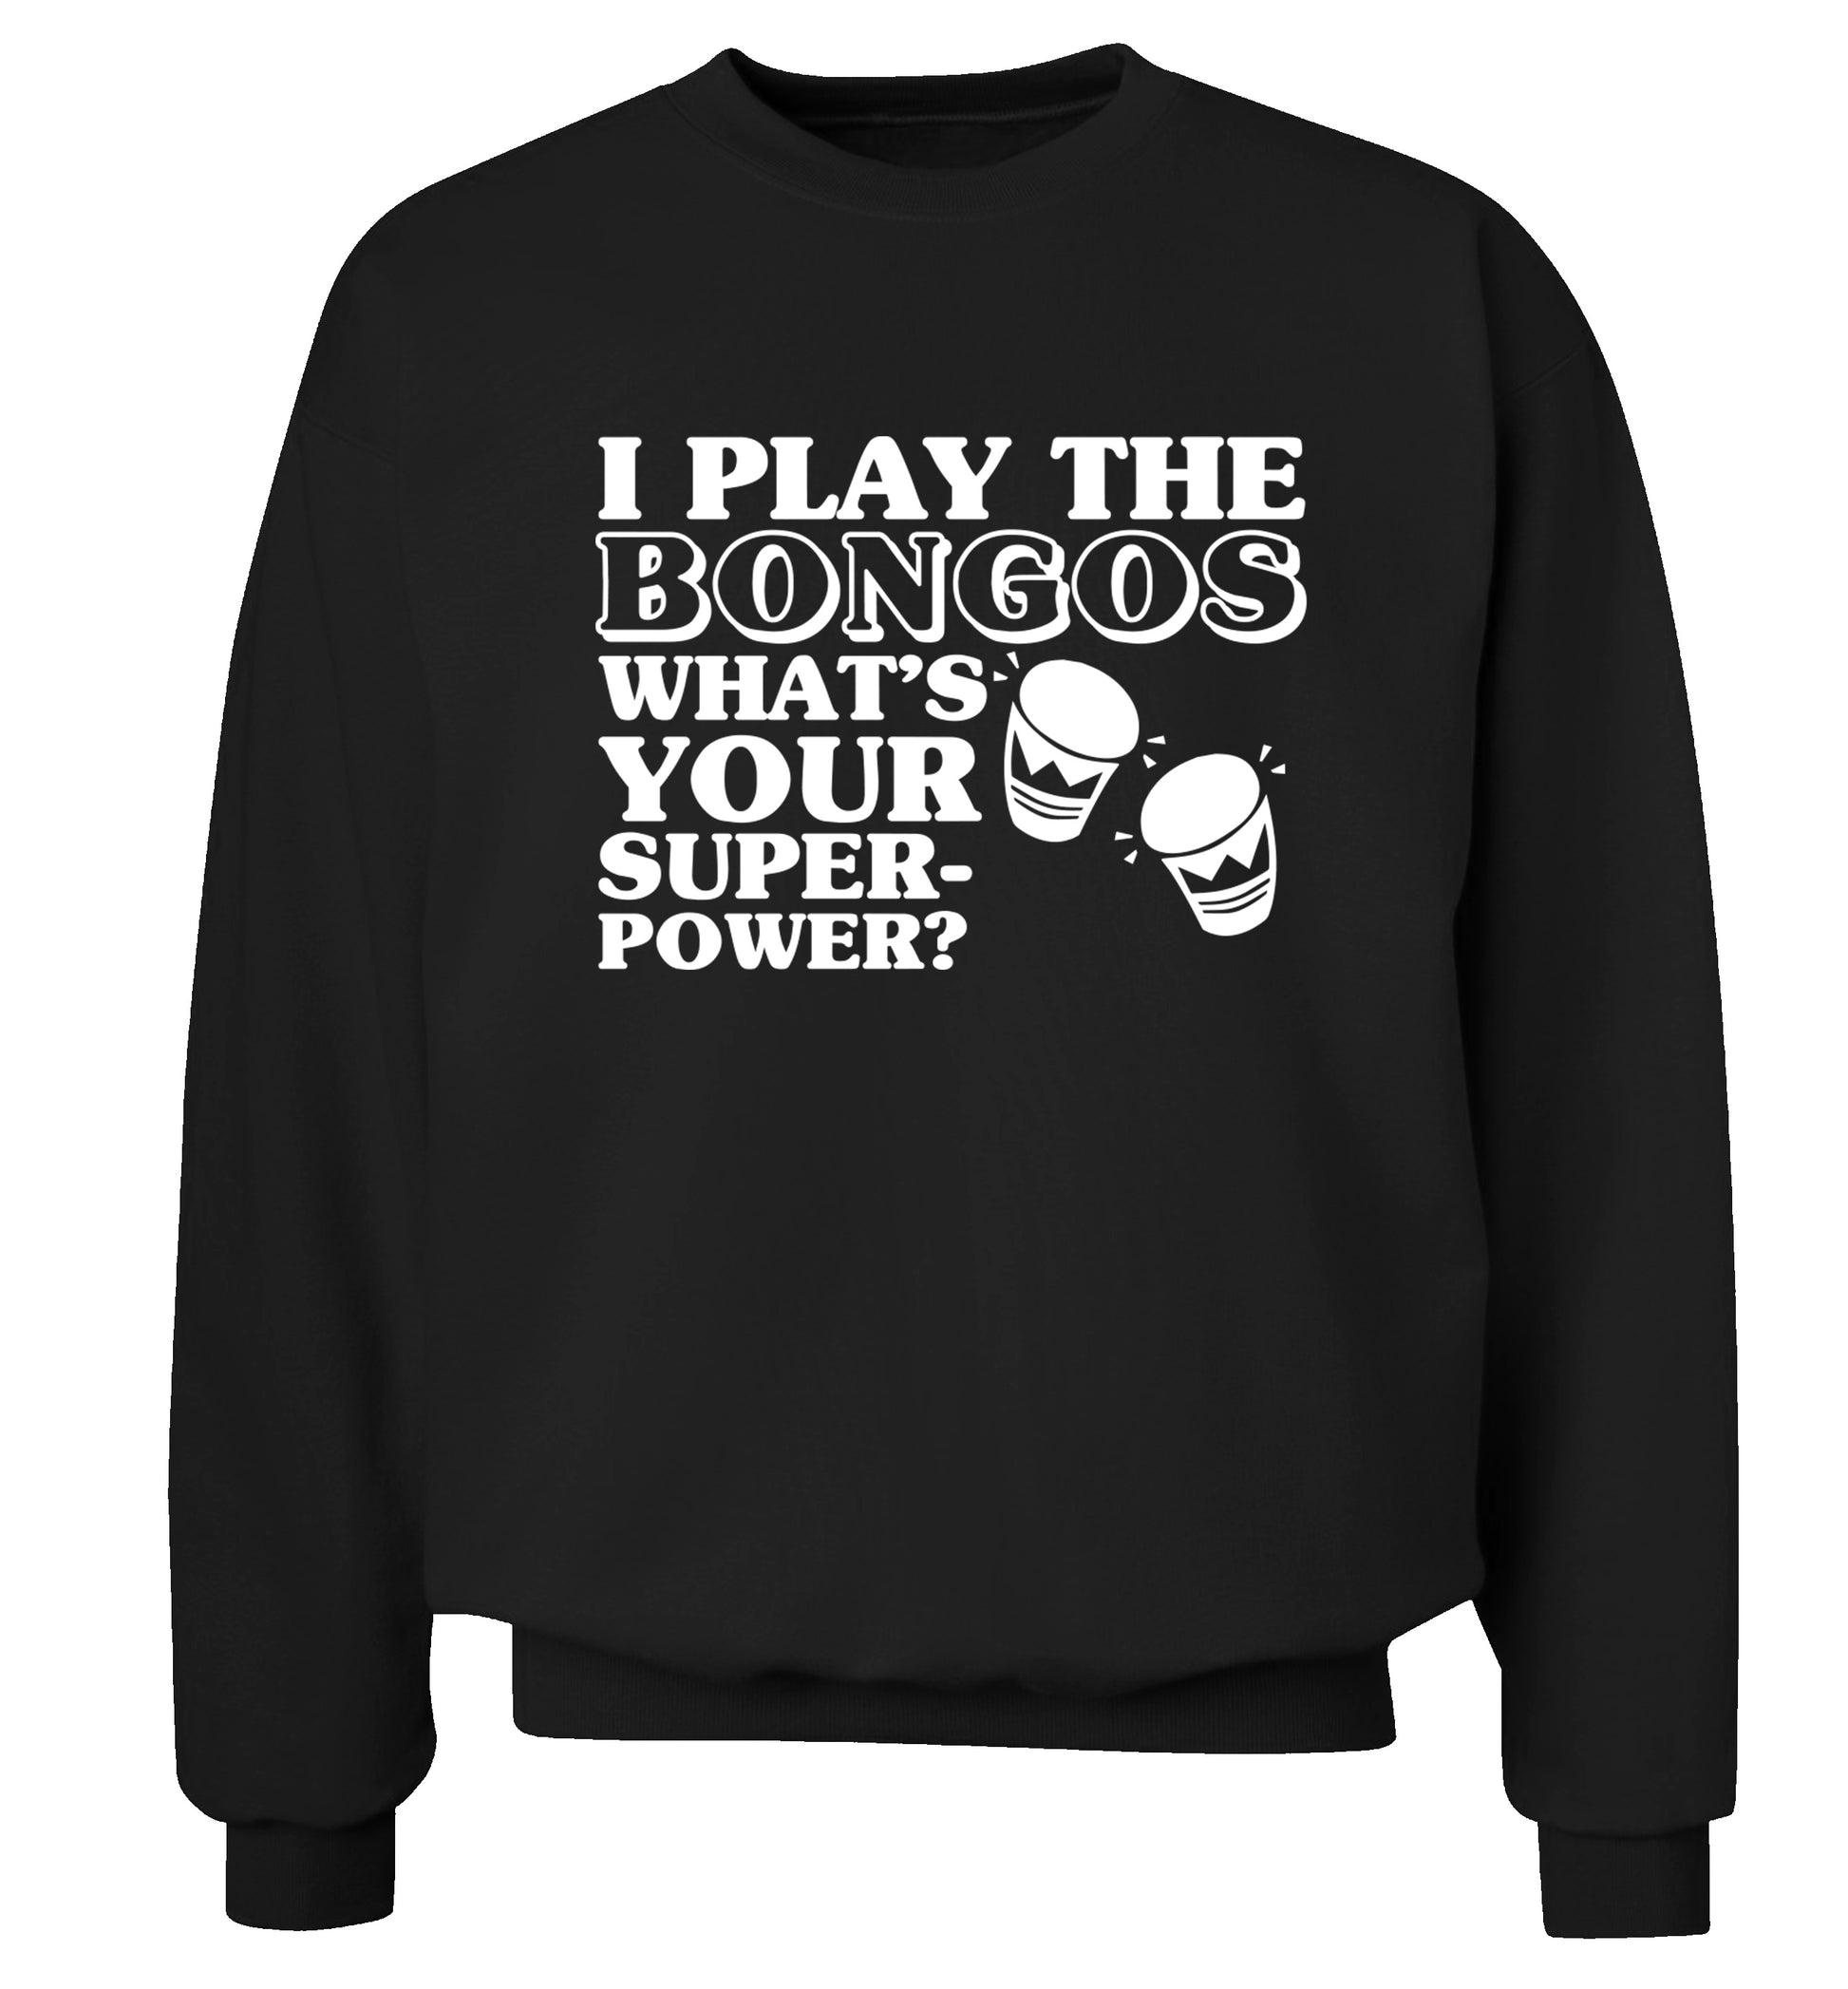 I play the bongos what's your superpower? Adult's unisexblack Sweater 2XL